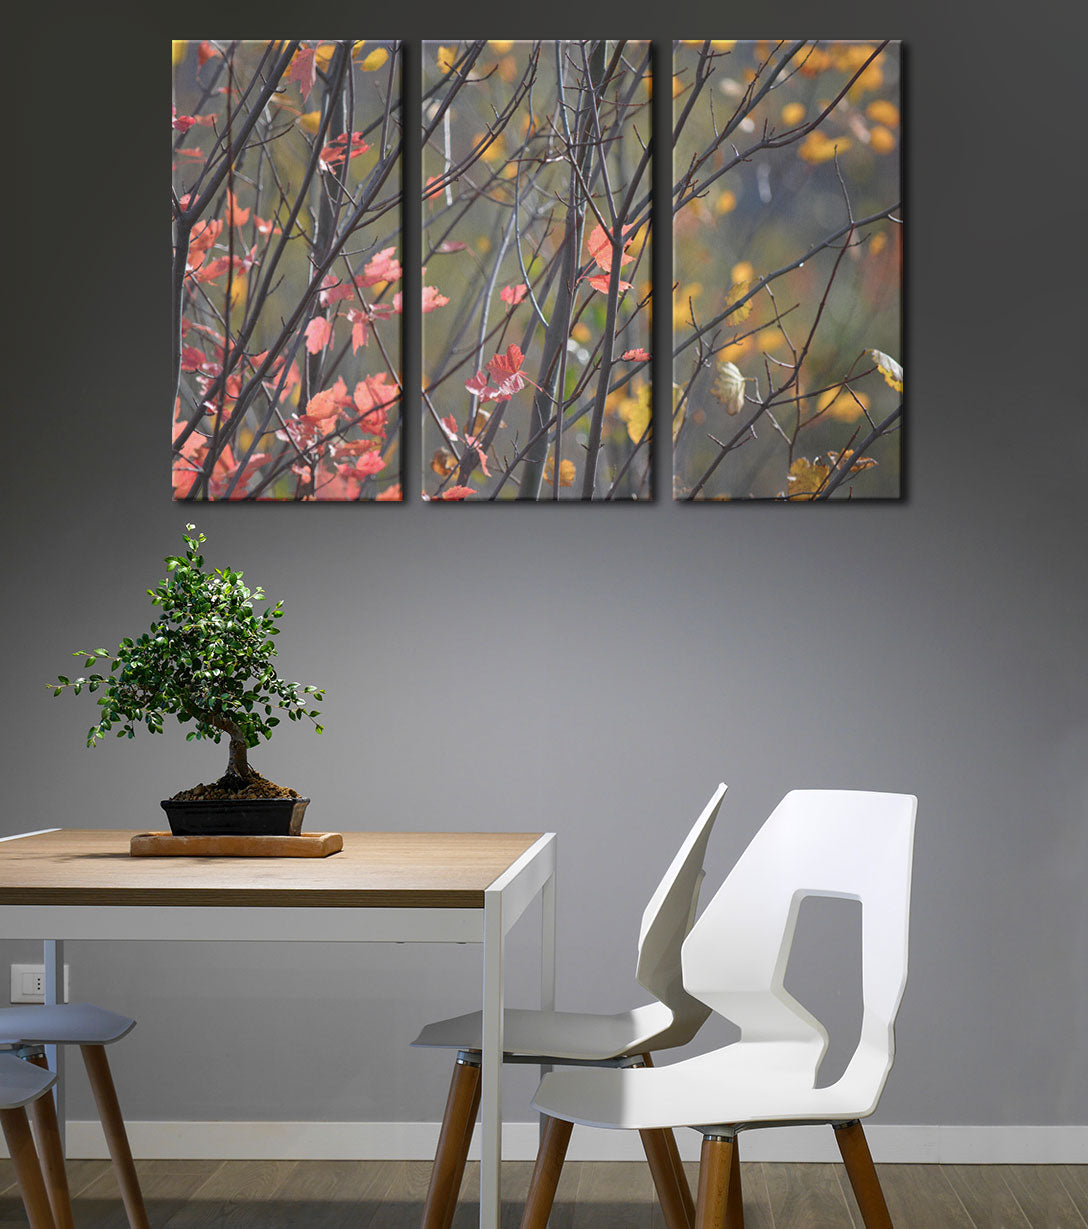 Upper Michigan Art | Fall Color Leaves in Pastels | 3-Piece Canvas Art Print